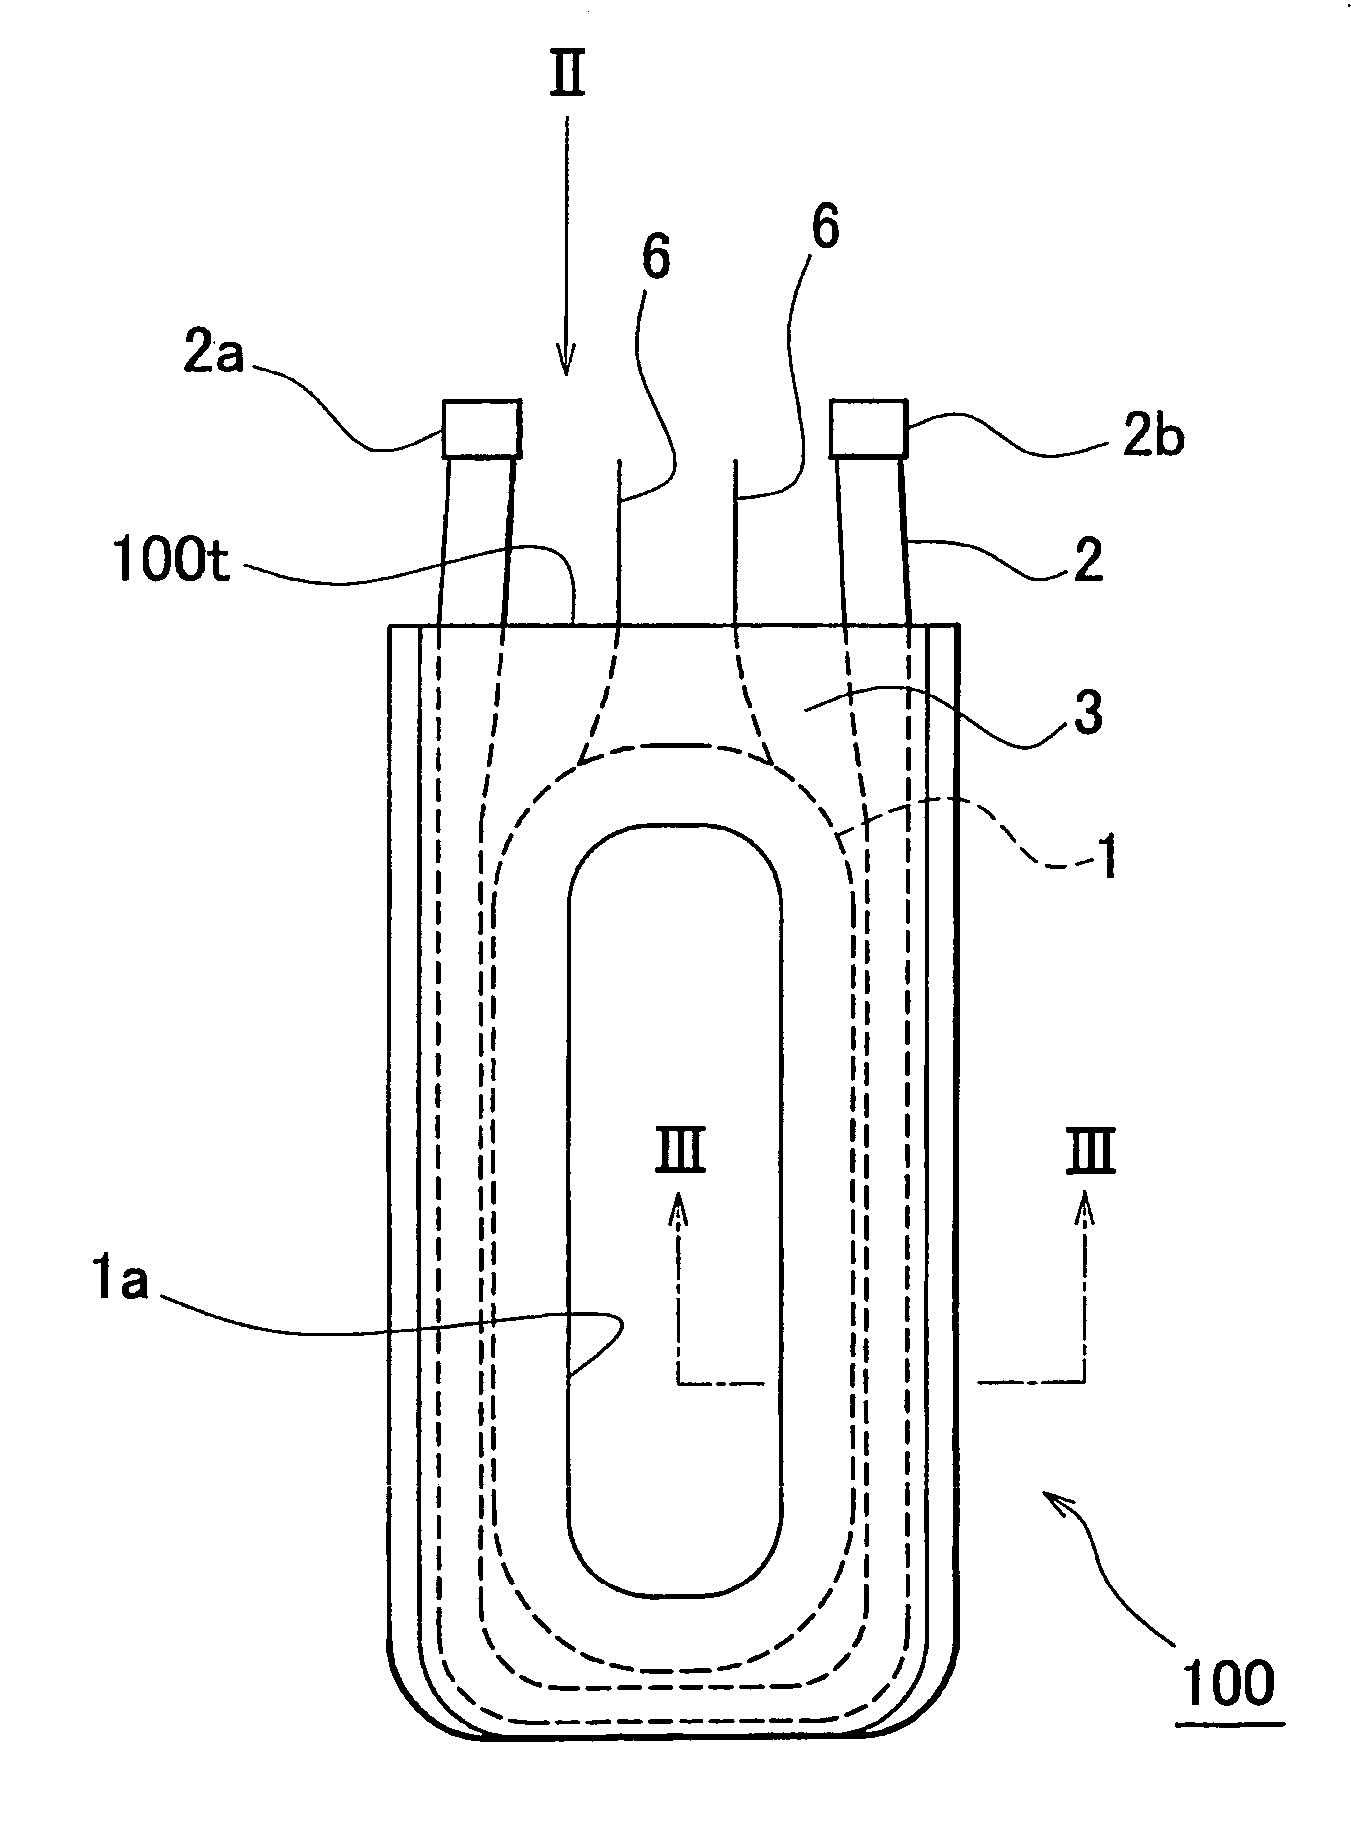 Stator coil module, method of manufacturing the same, and electric rotating machine